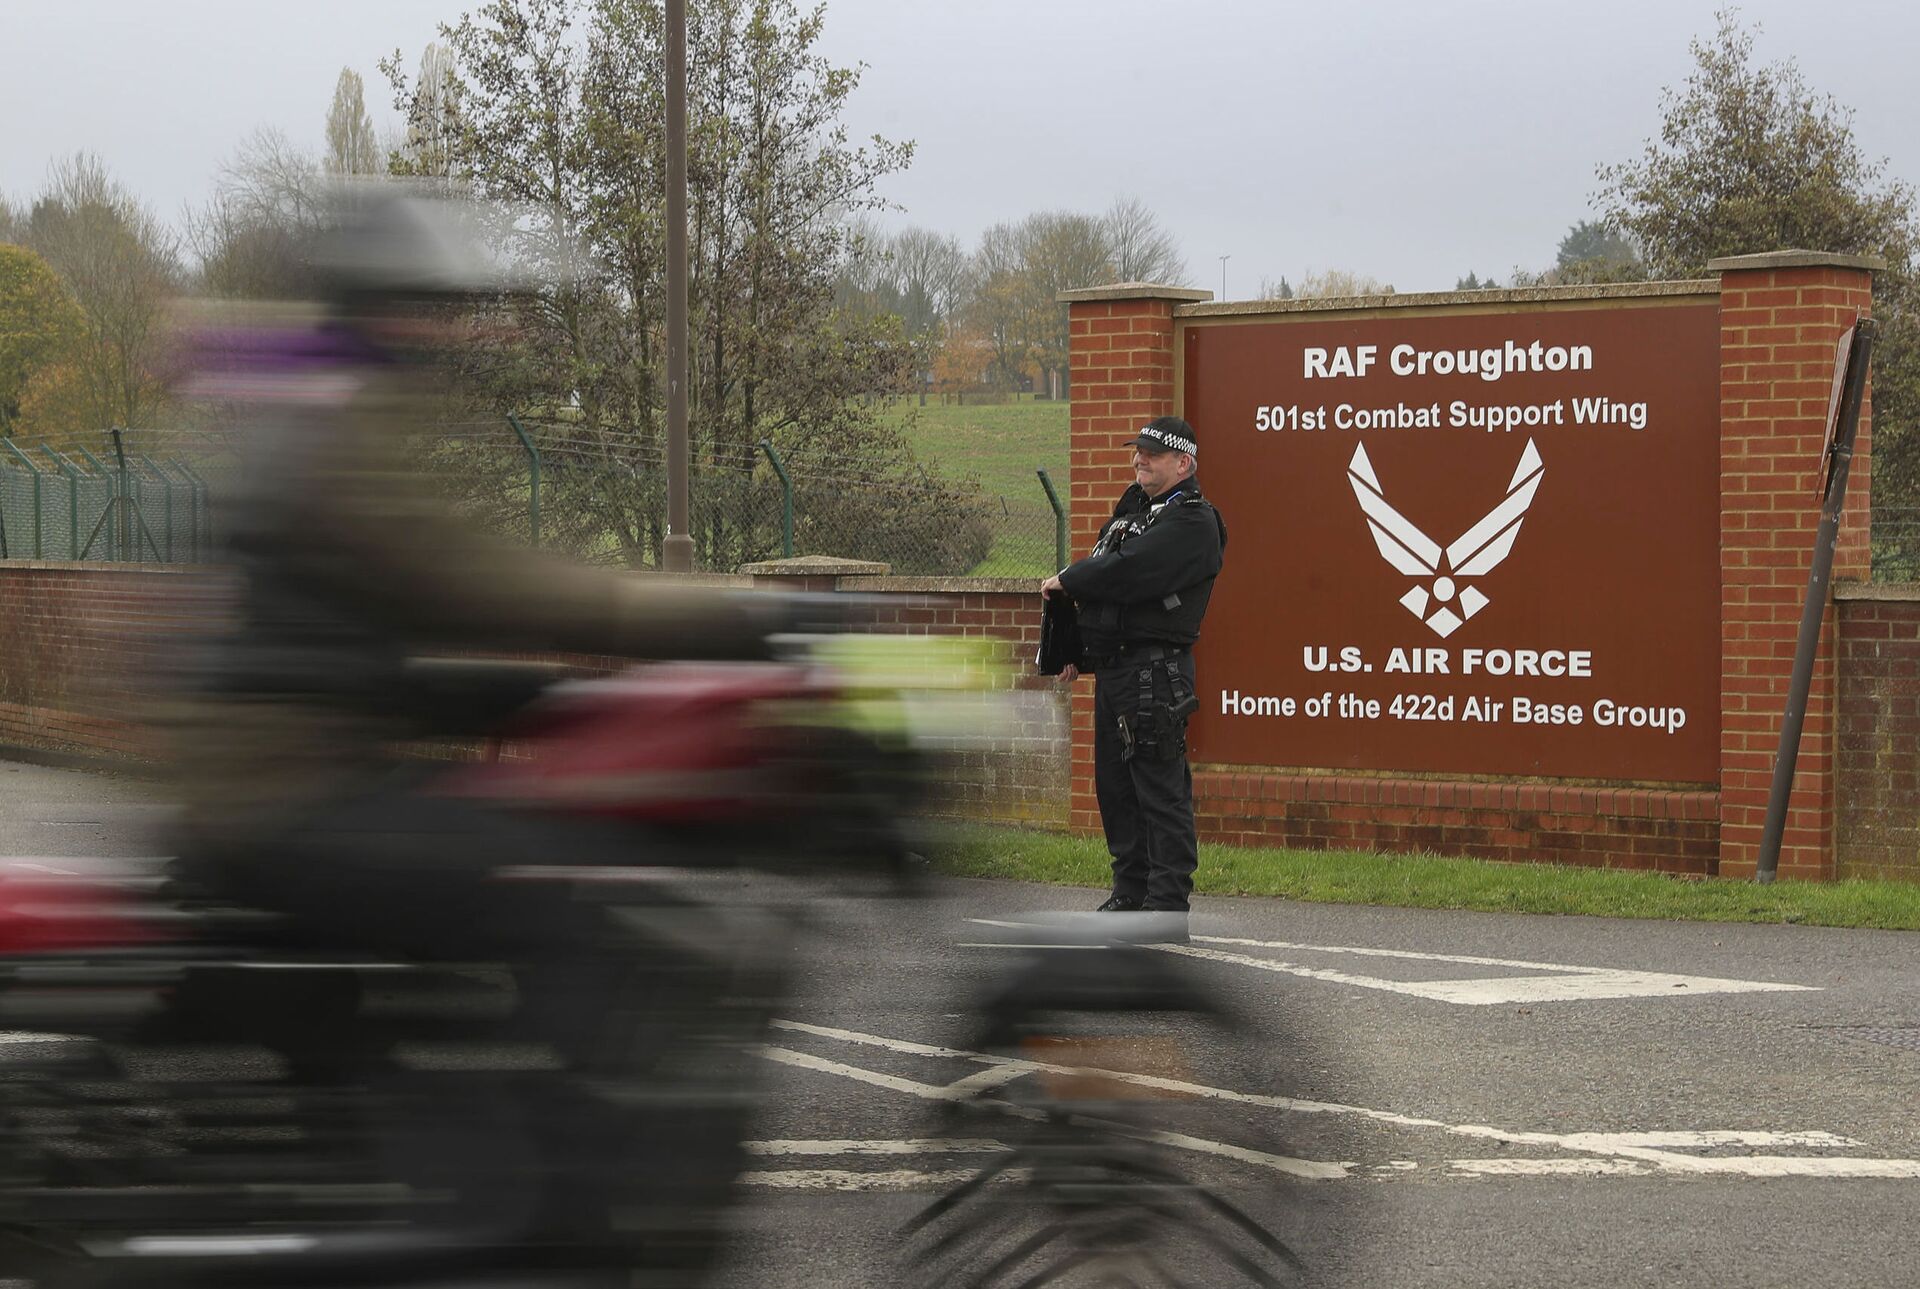 A motorbike convoy follows Harry Dunn's last ride as a tribute to the teenager who died when his motorbike was involved in a head-on collision in August 2019, near to RAF Croughton airforce base, in Brackley, England - Sputnik International, 1920, 07.09.2021